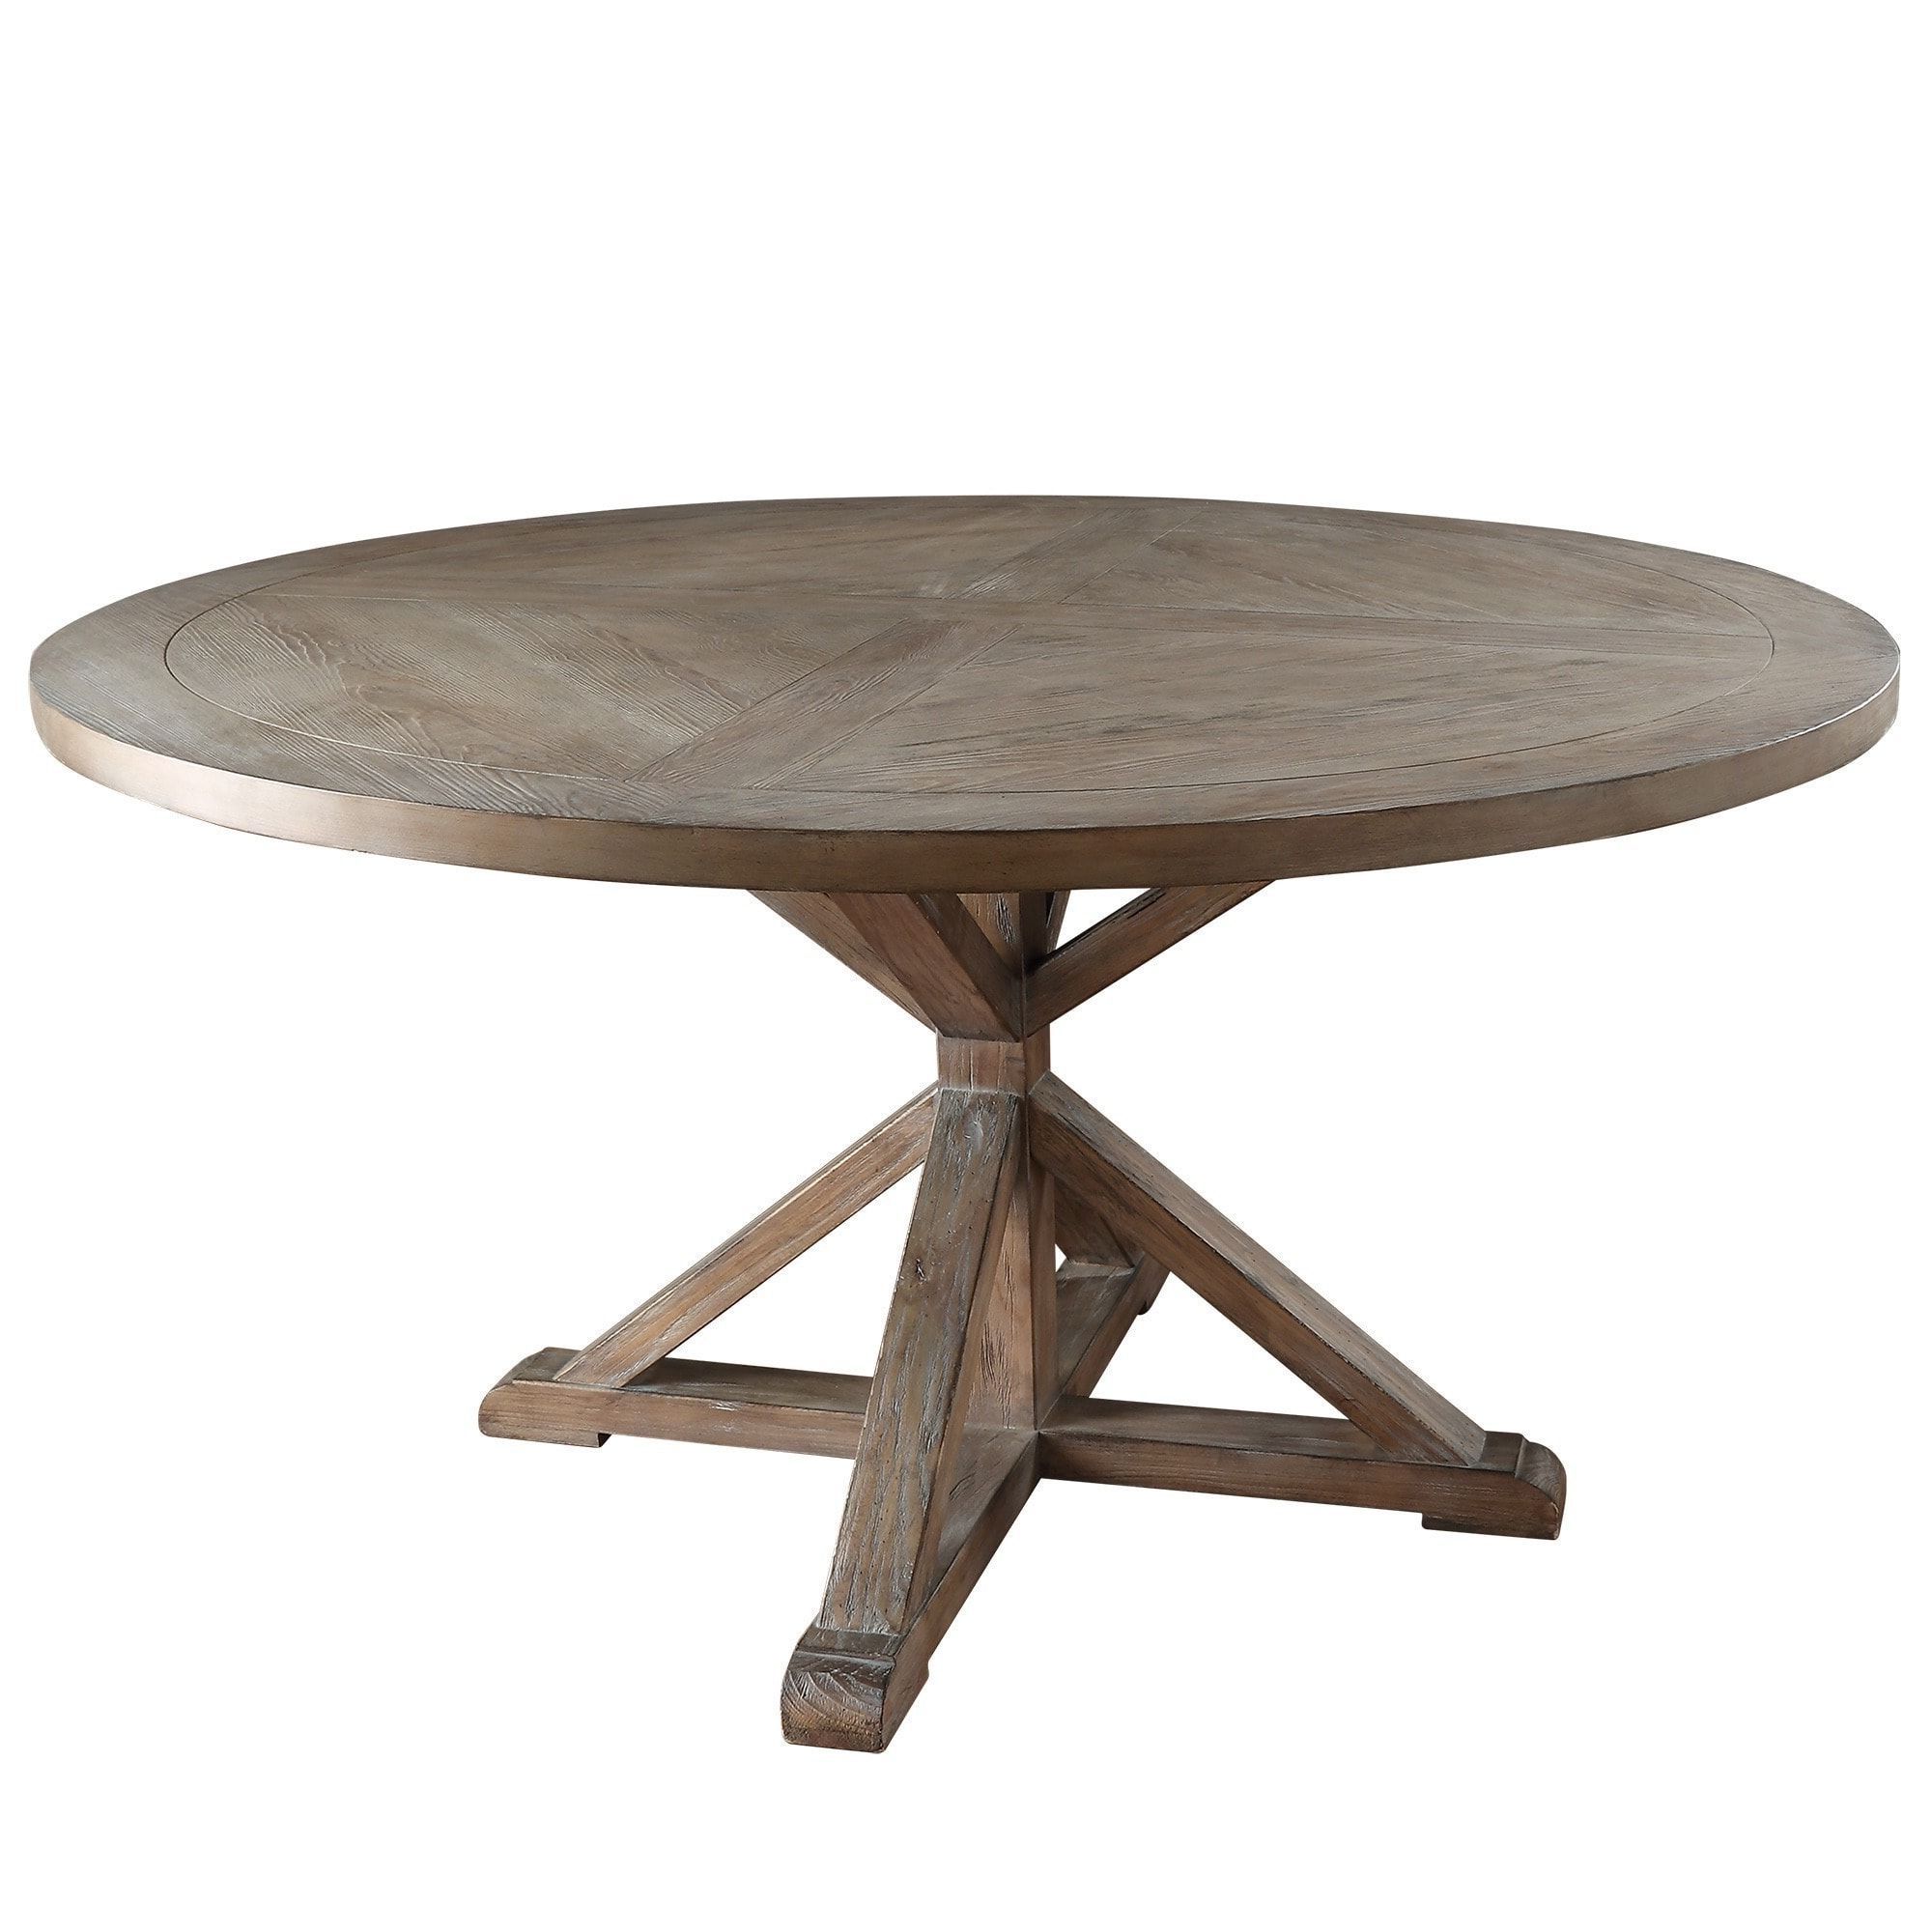 Current Benchwright Counter Height Tables Throughout Benchwright Rustic X Base Round Pine Wood Dining Table (View 4 of 25)